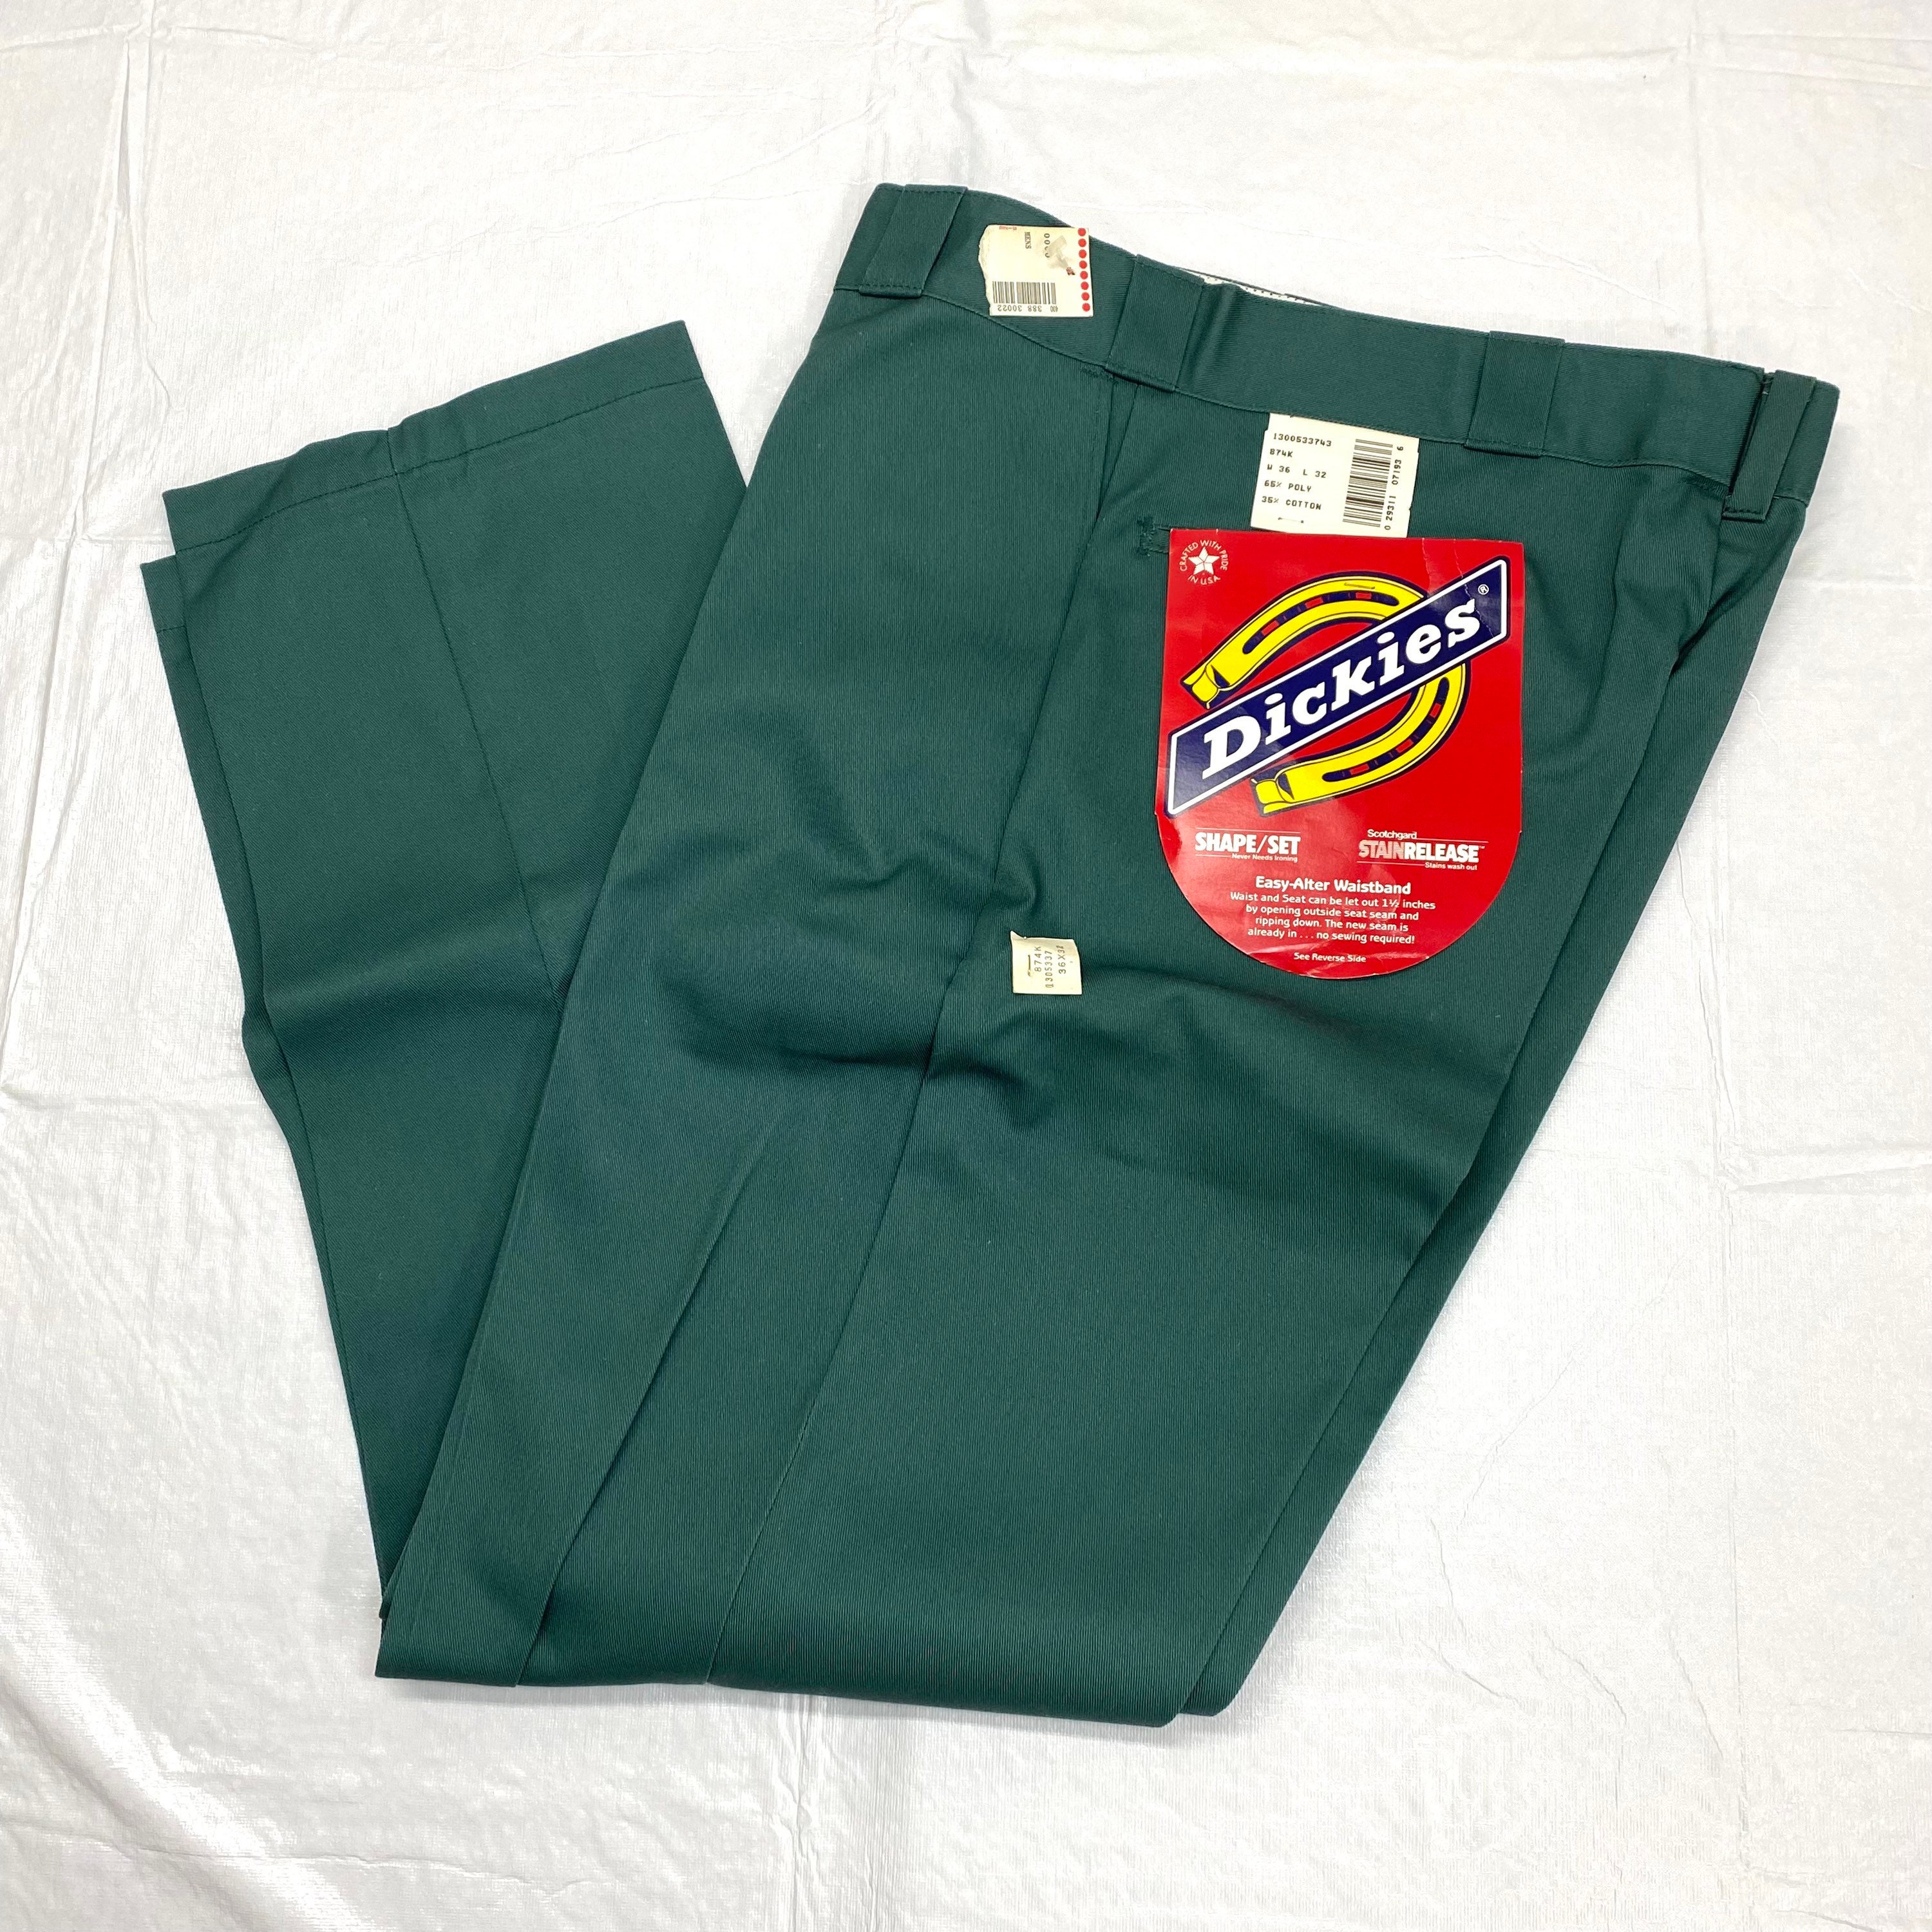 1980s Deadstock Dickies Chinos Work Pants Green Size 36x32 NWT - Etsy